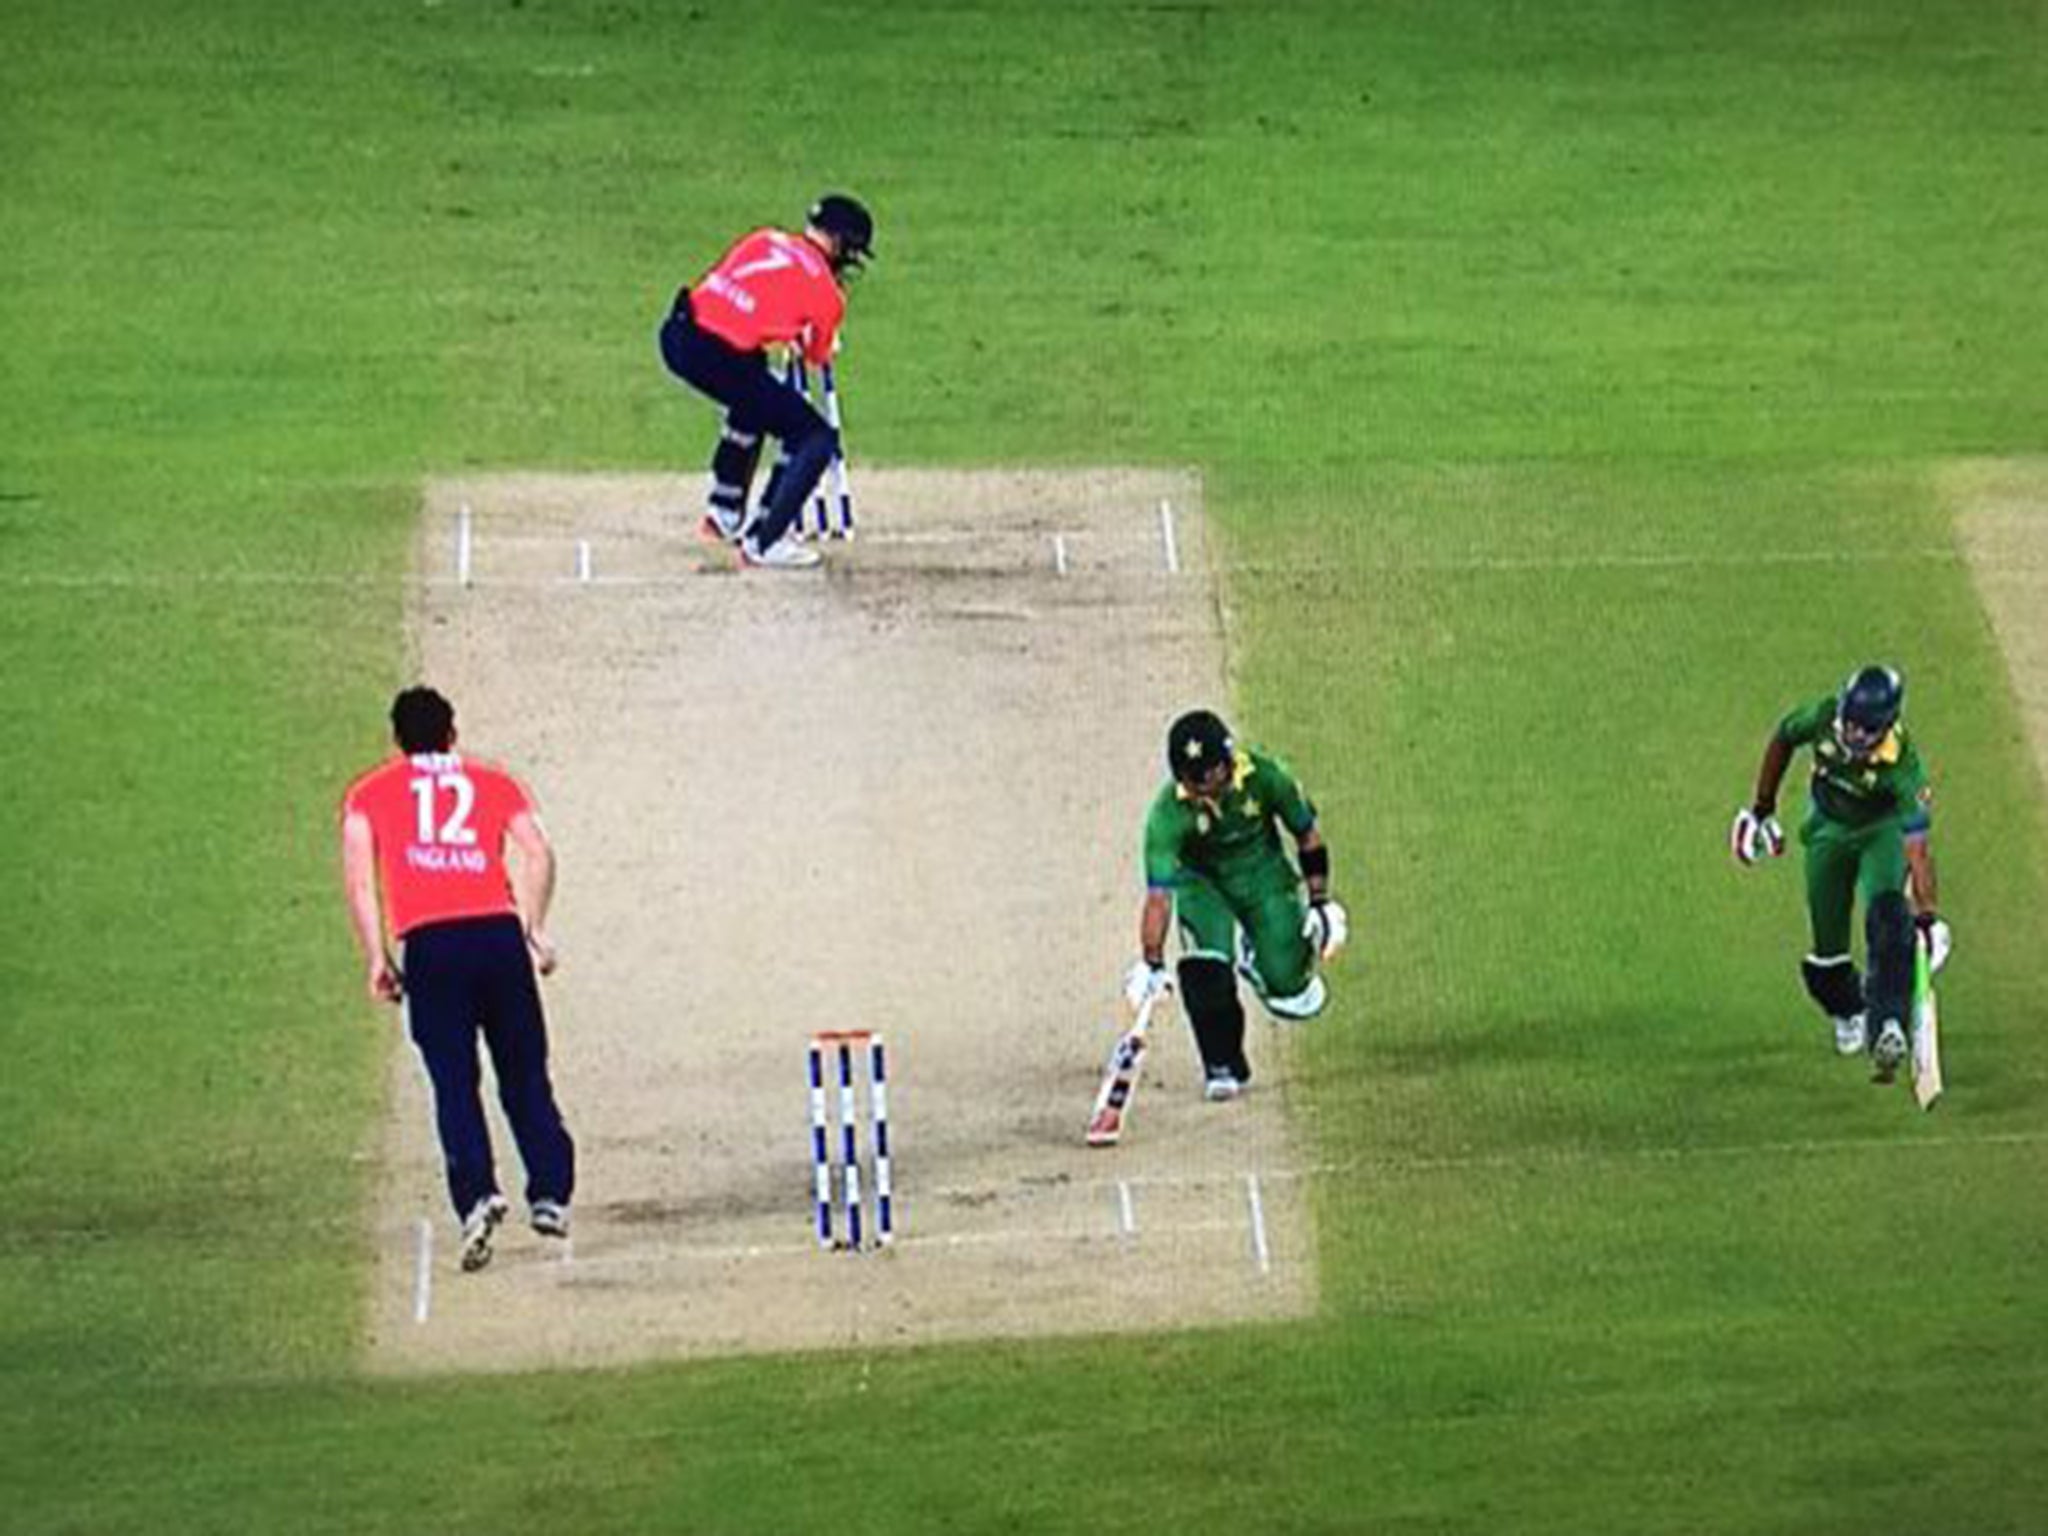 Umar Akmal is run out in farcical fashion for the home side